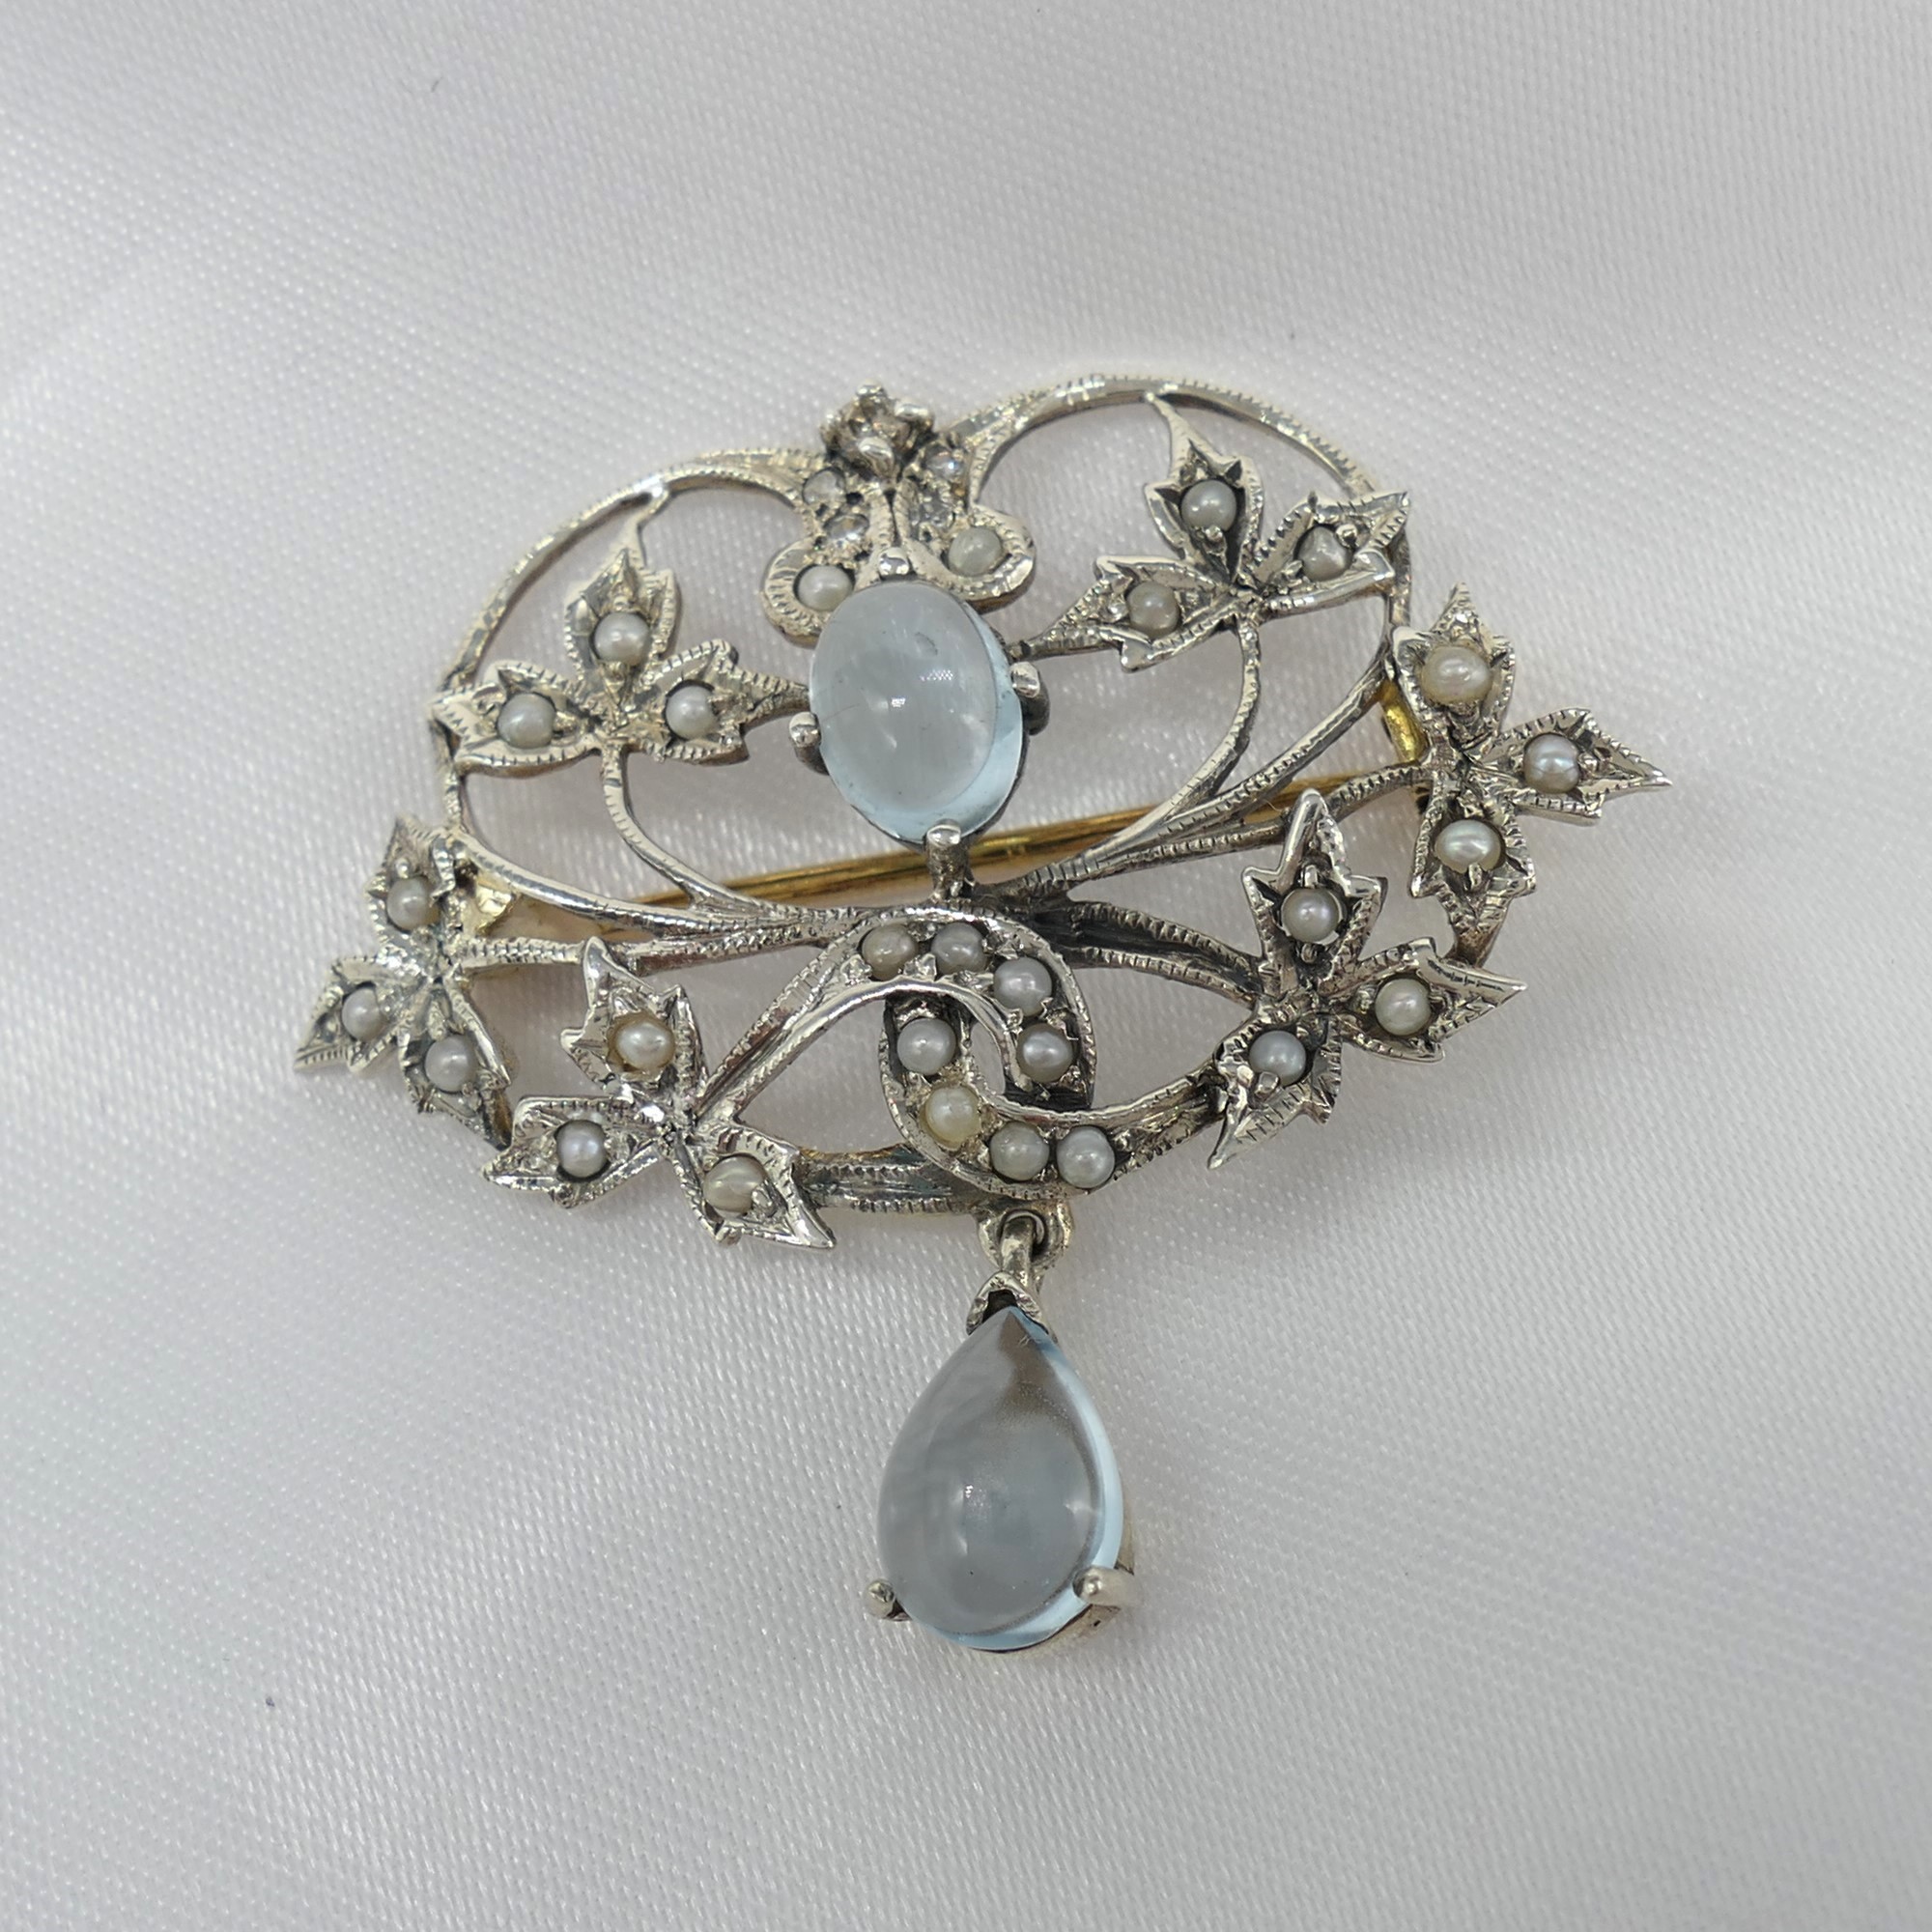 Edwardian-Style Topaz and Diamond Brooch With 2 Piece Gift Box - Image 6 of 7